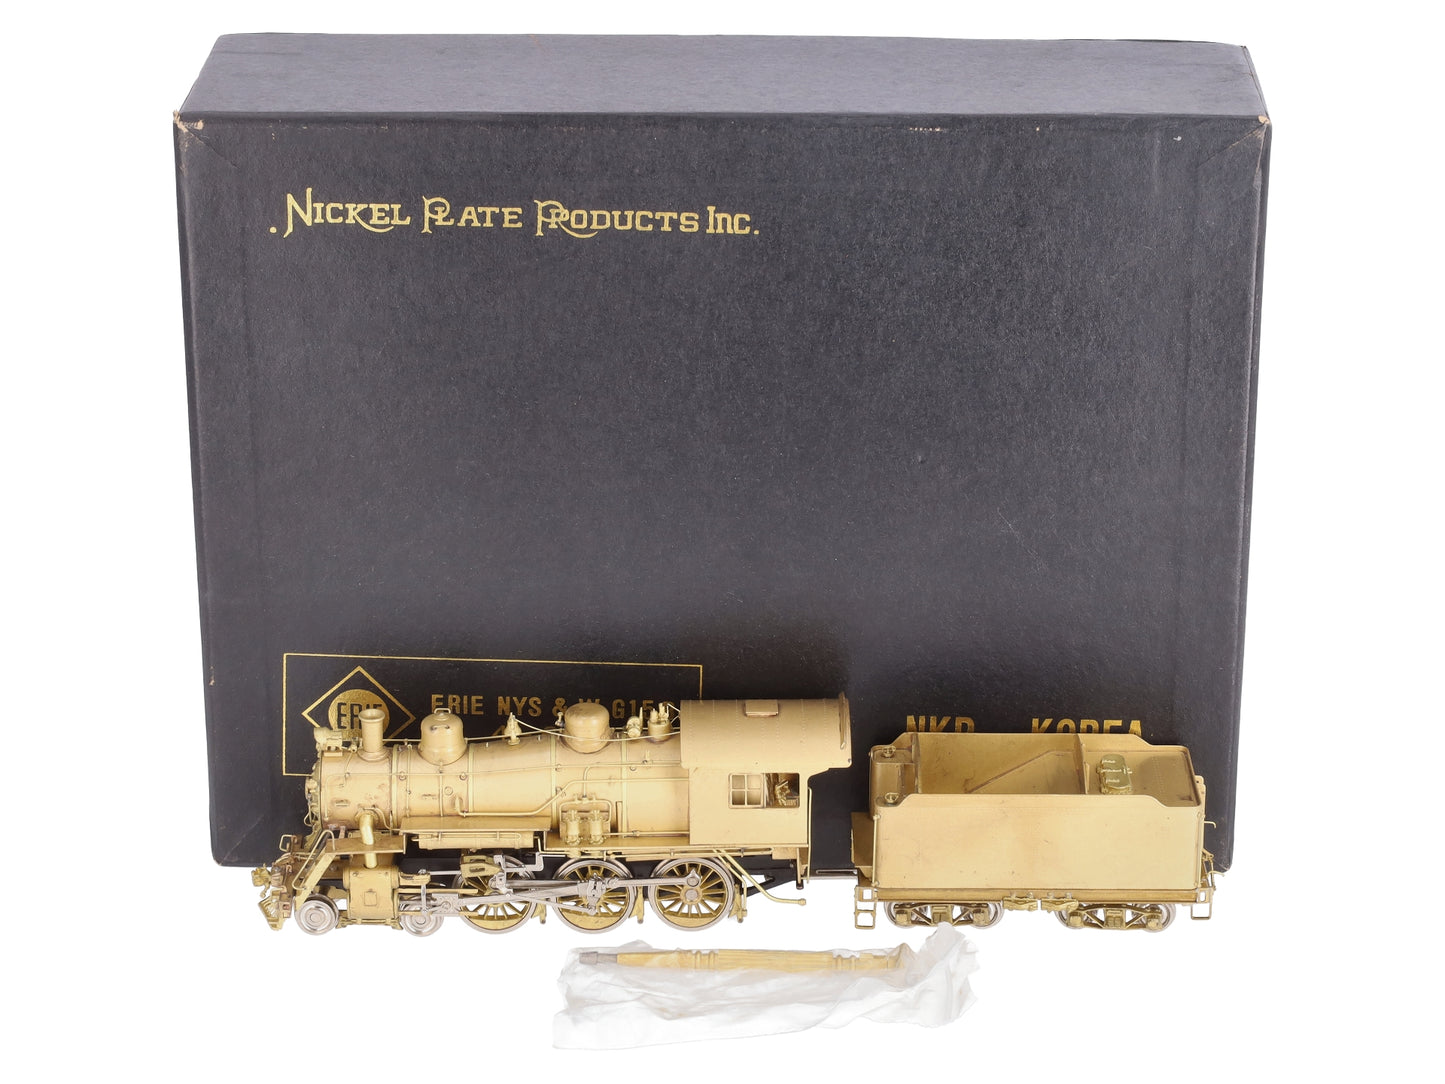 Nickel Plate Products HO BRASS Erie NYS&W G15B 4-6-0 Steam Locomotive & Tender EX/Box